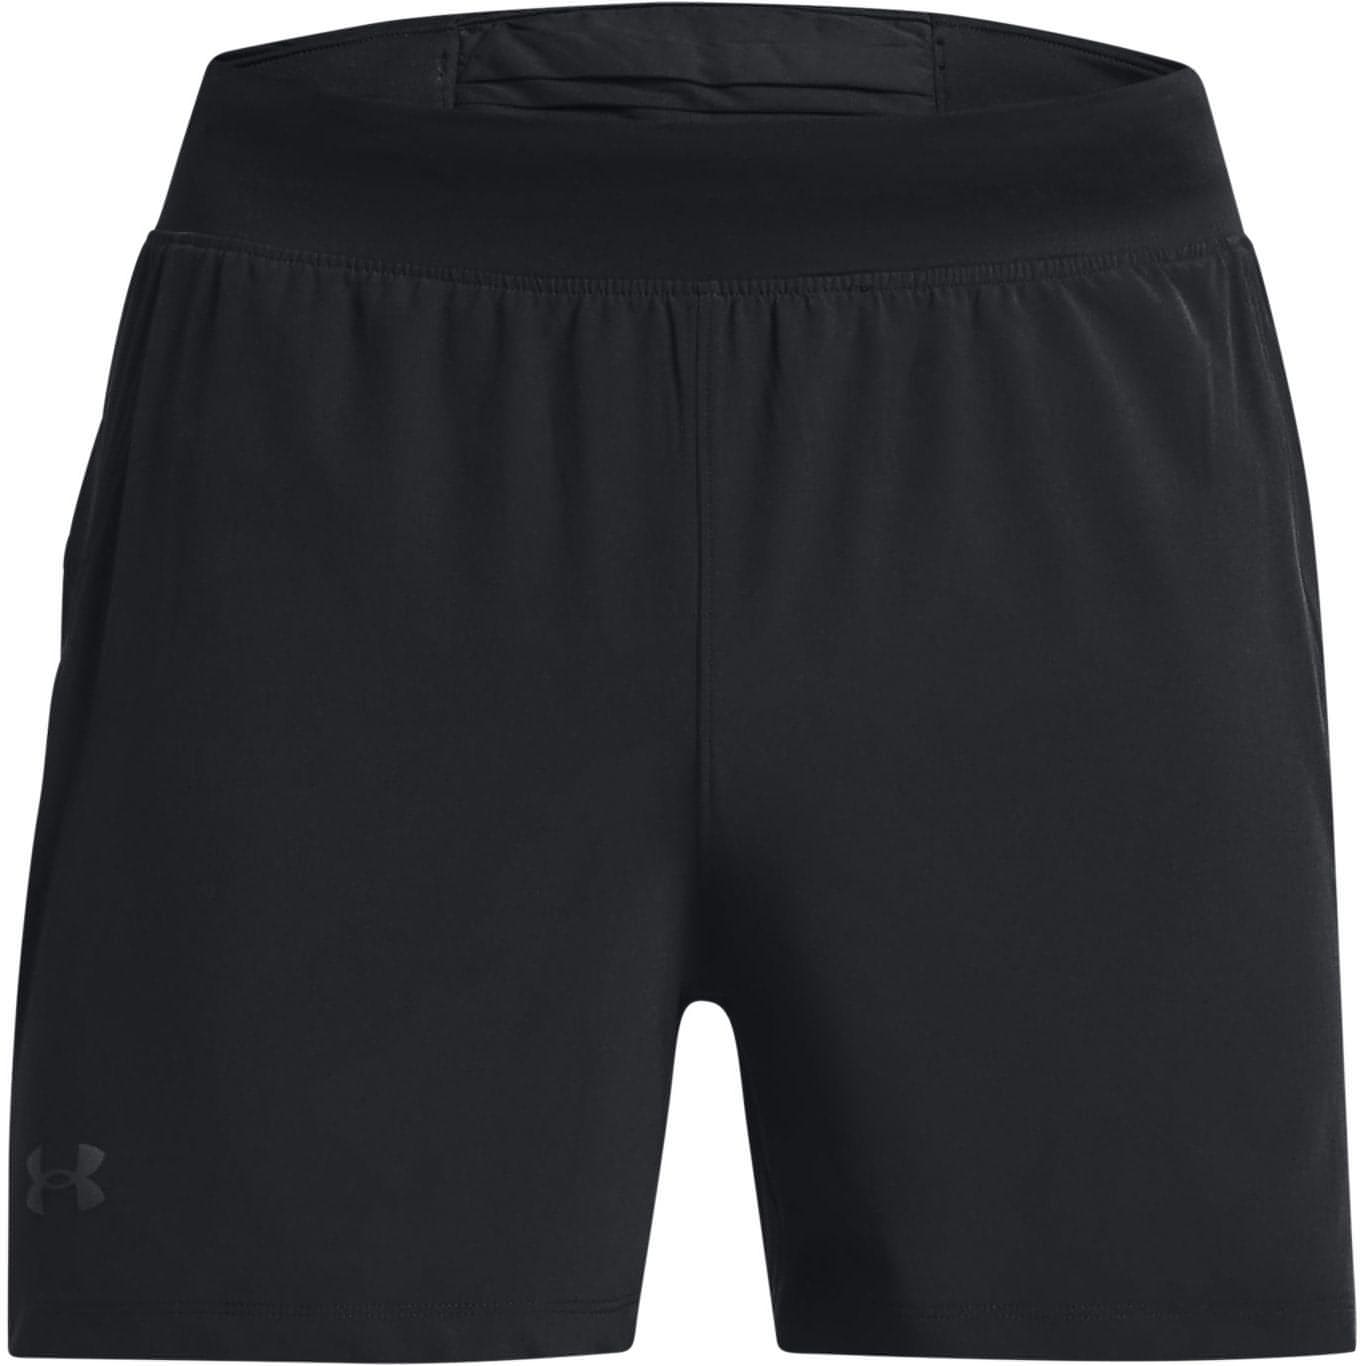 Under Armour Launch Elite Inch Shorts Front - Front View